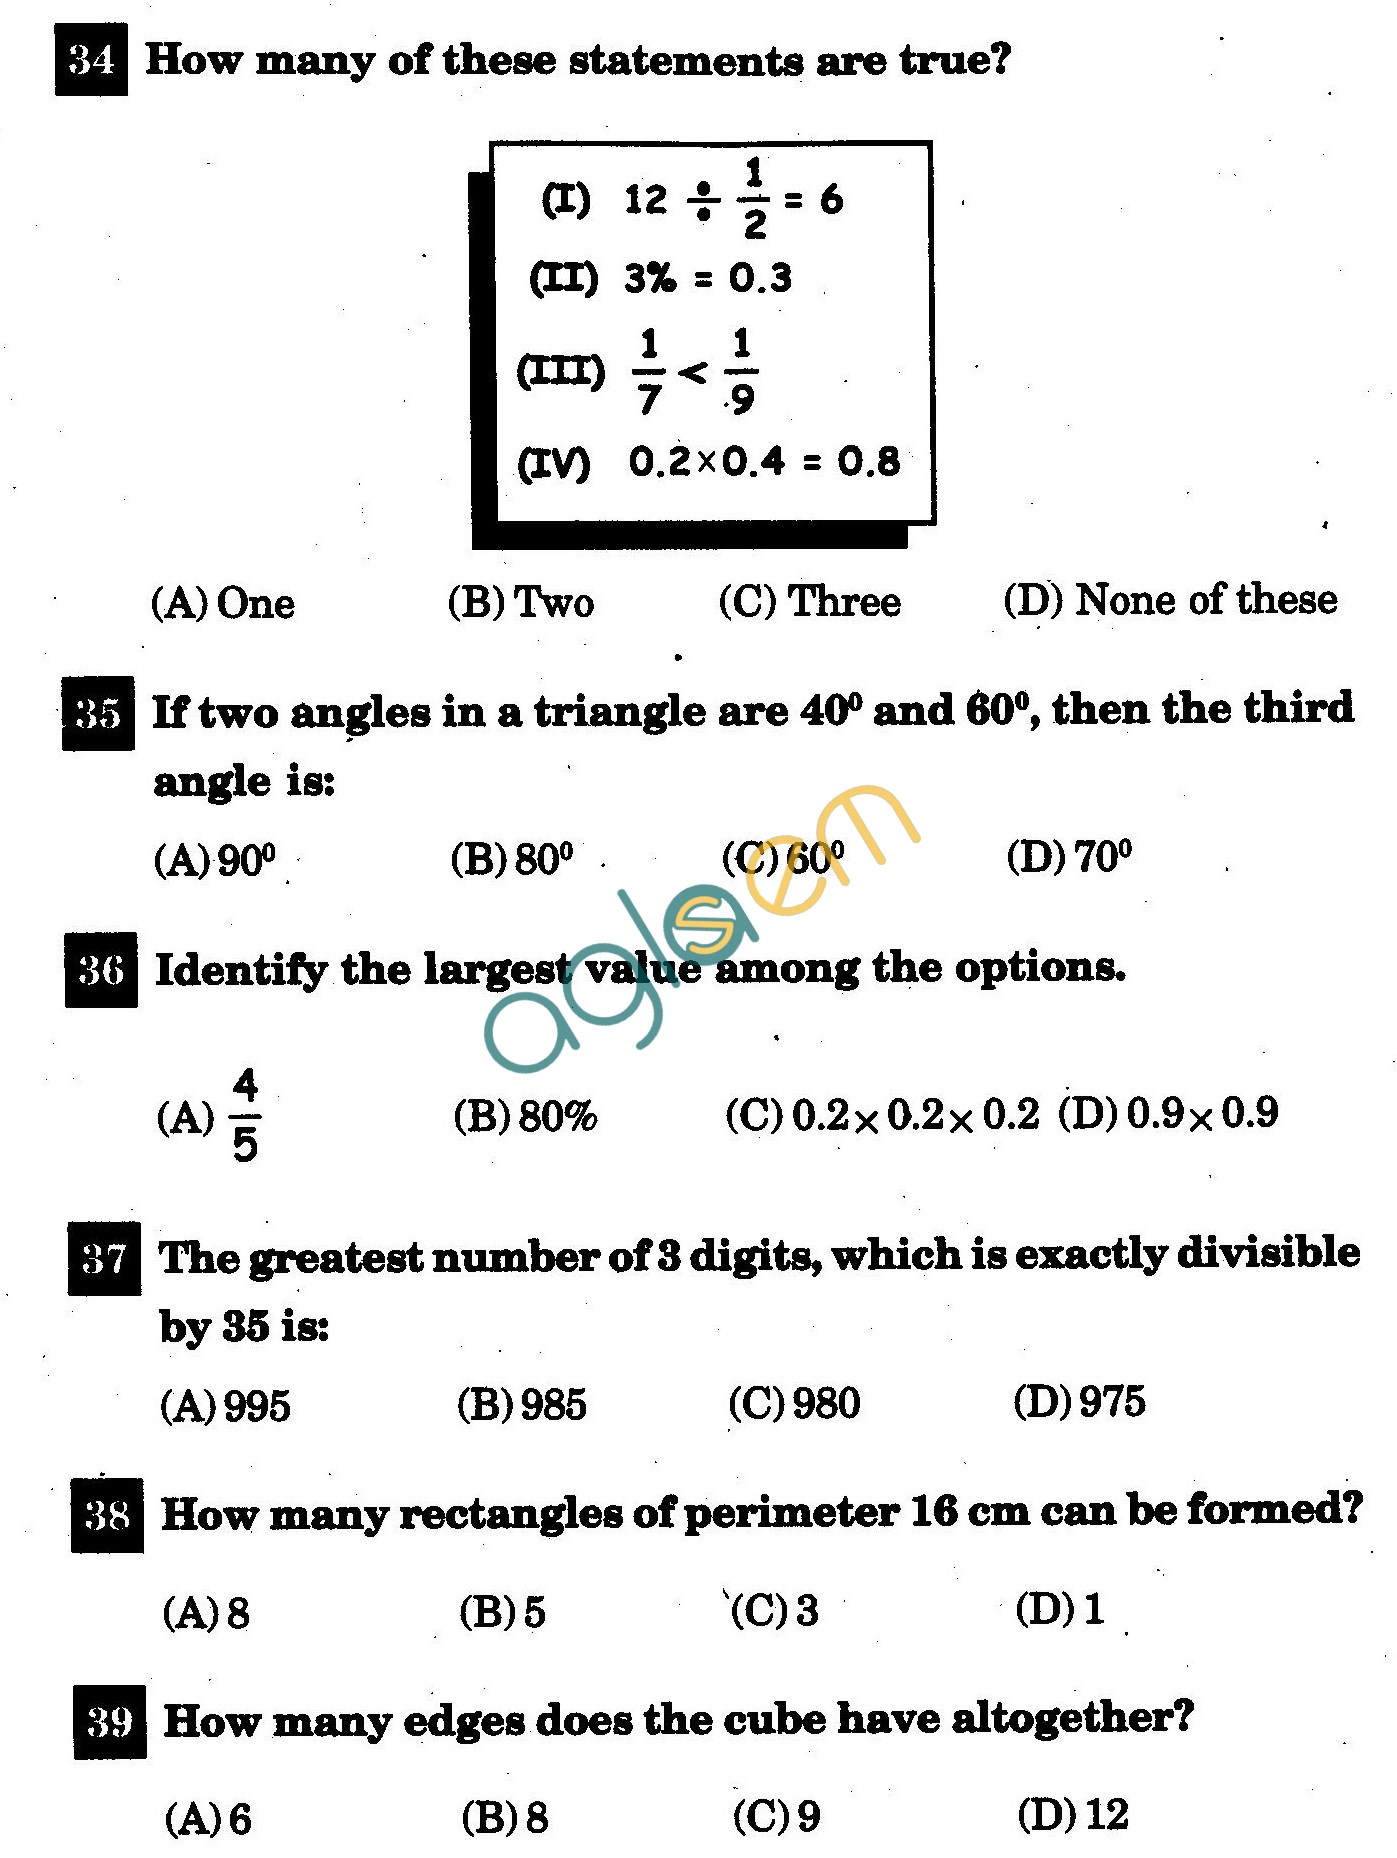 NSTSE 2011 Class V Question Paper with Answers - Mathematics